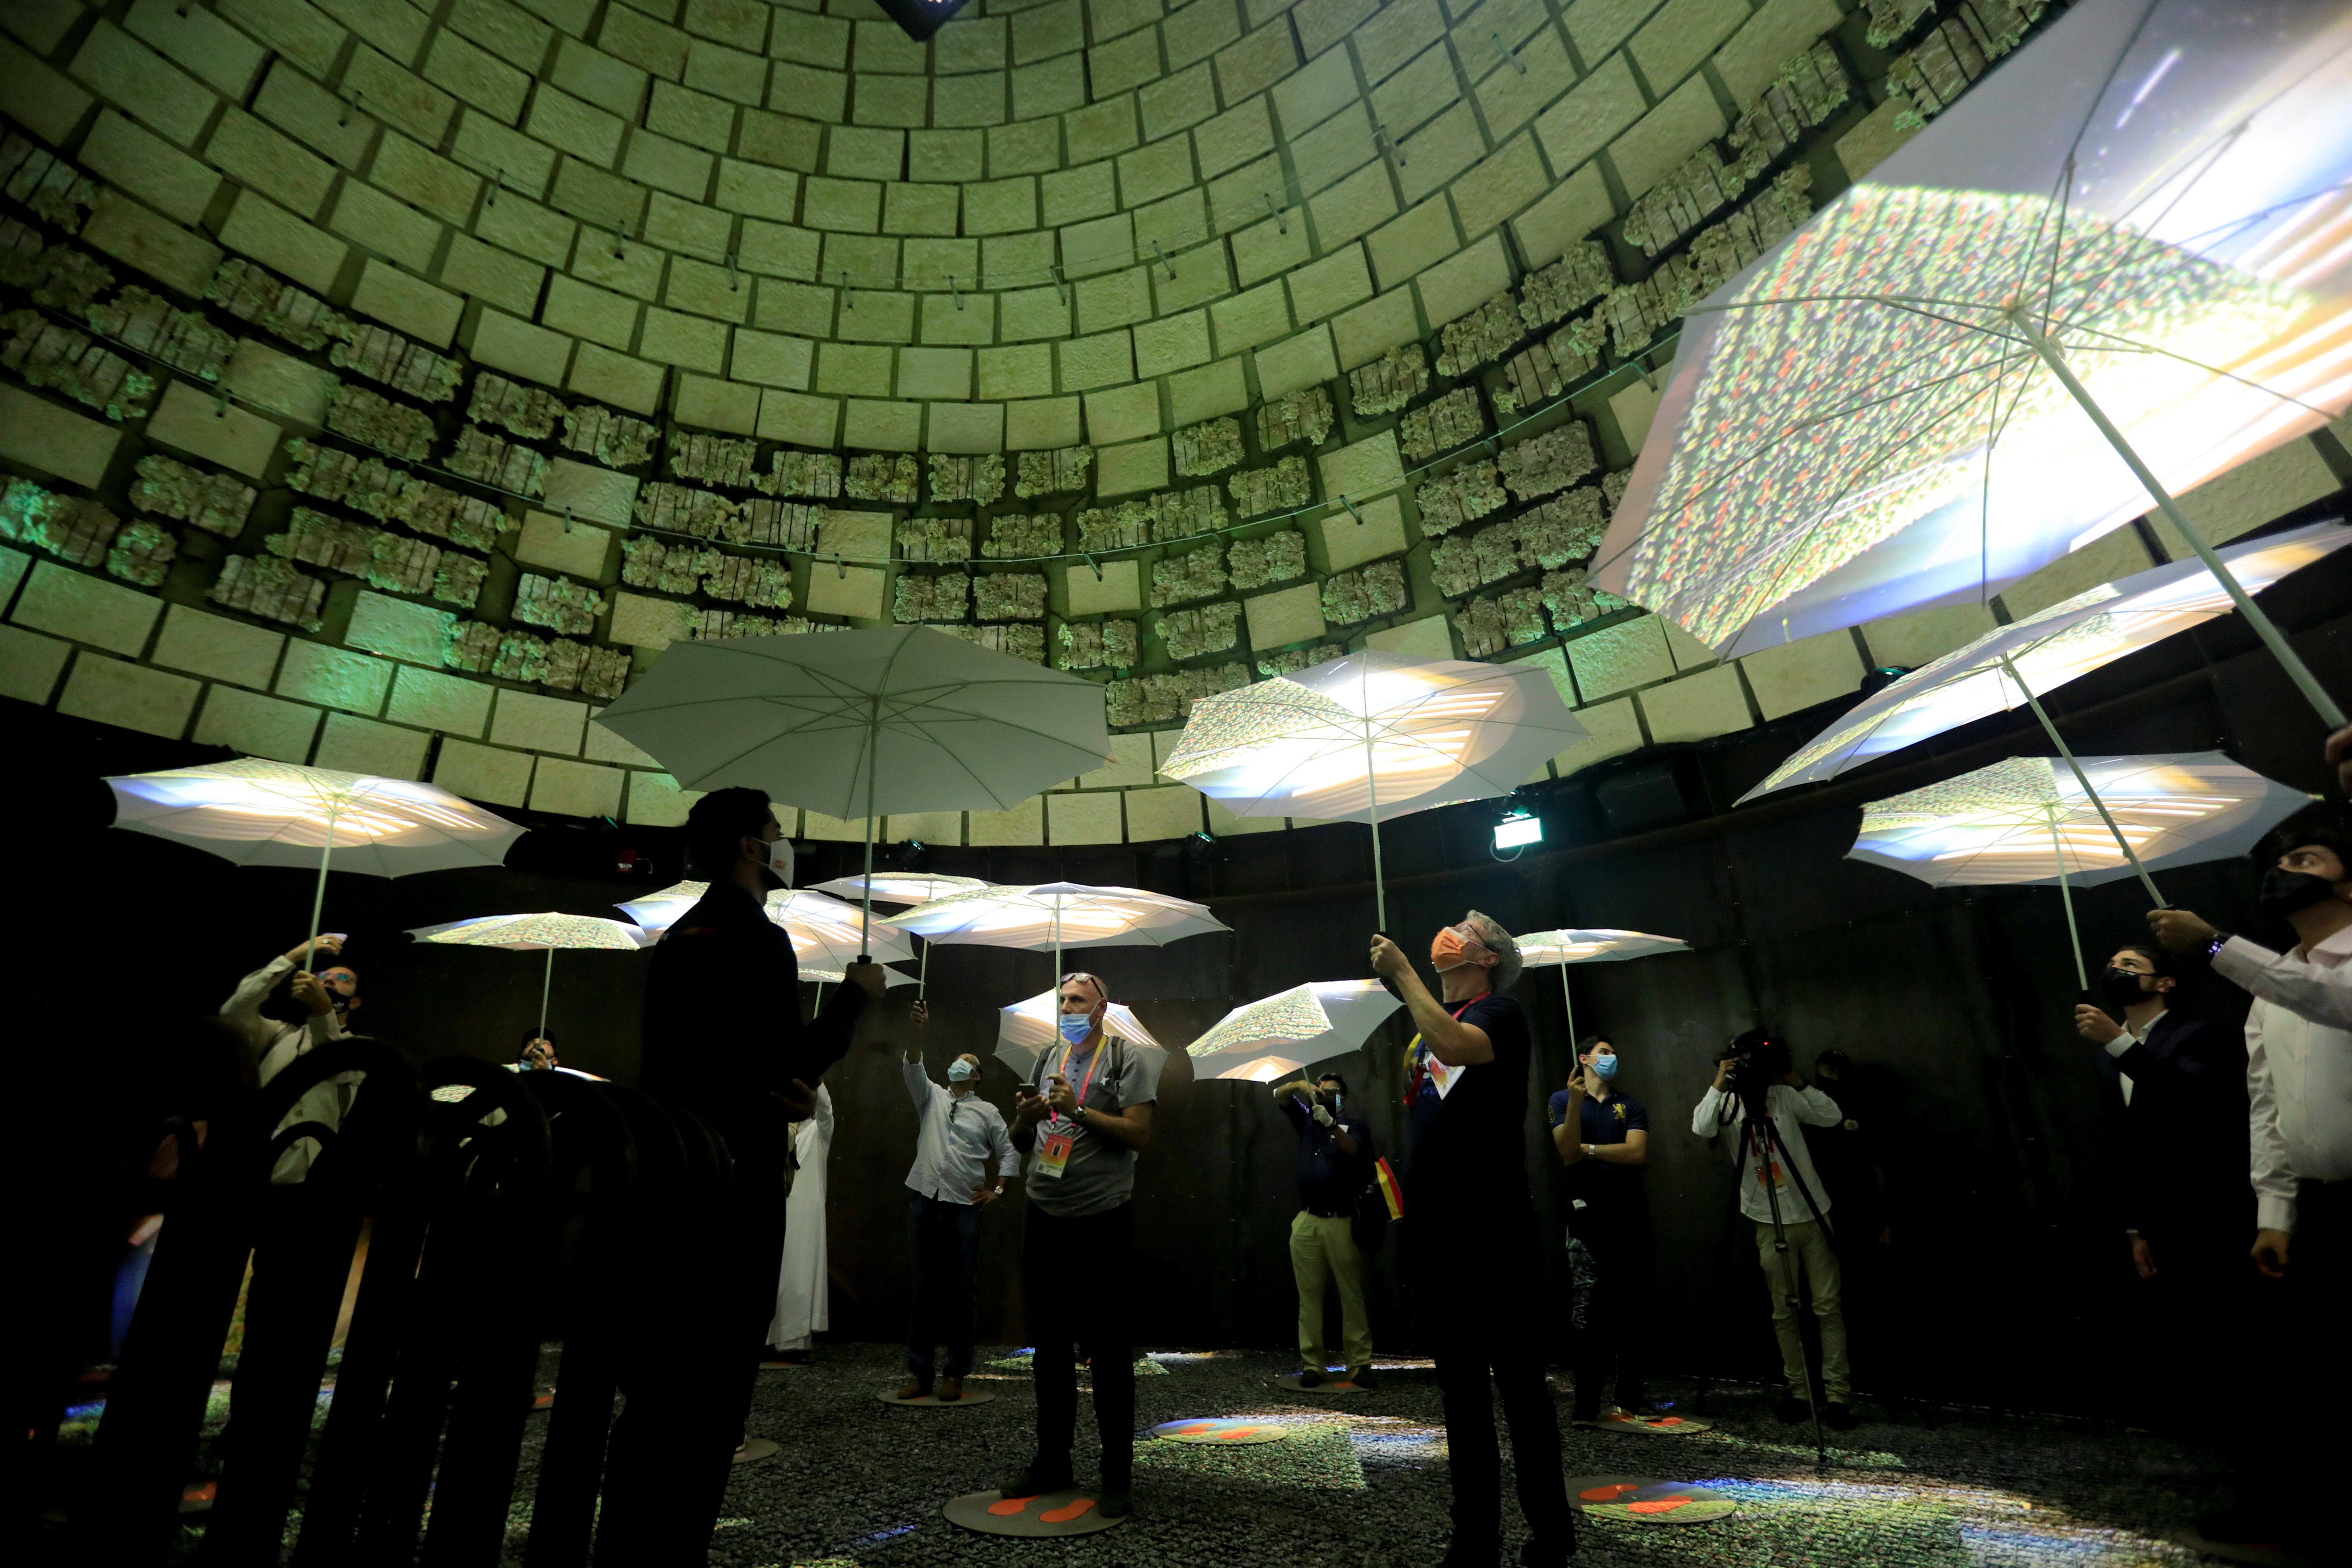 People hold umbrellas as they visit the Netherlands Pavilion at Dubai Expo 2020 in Dubai